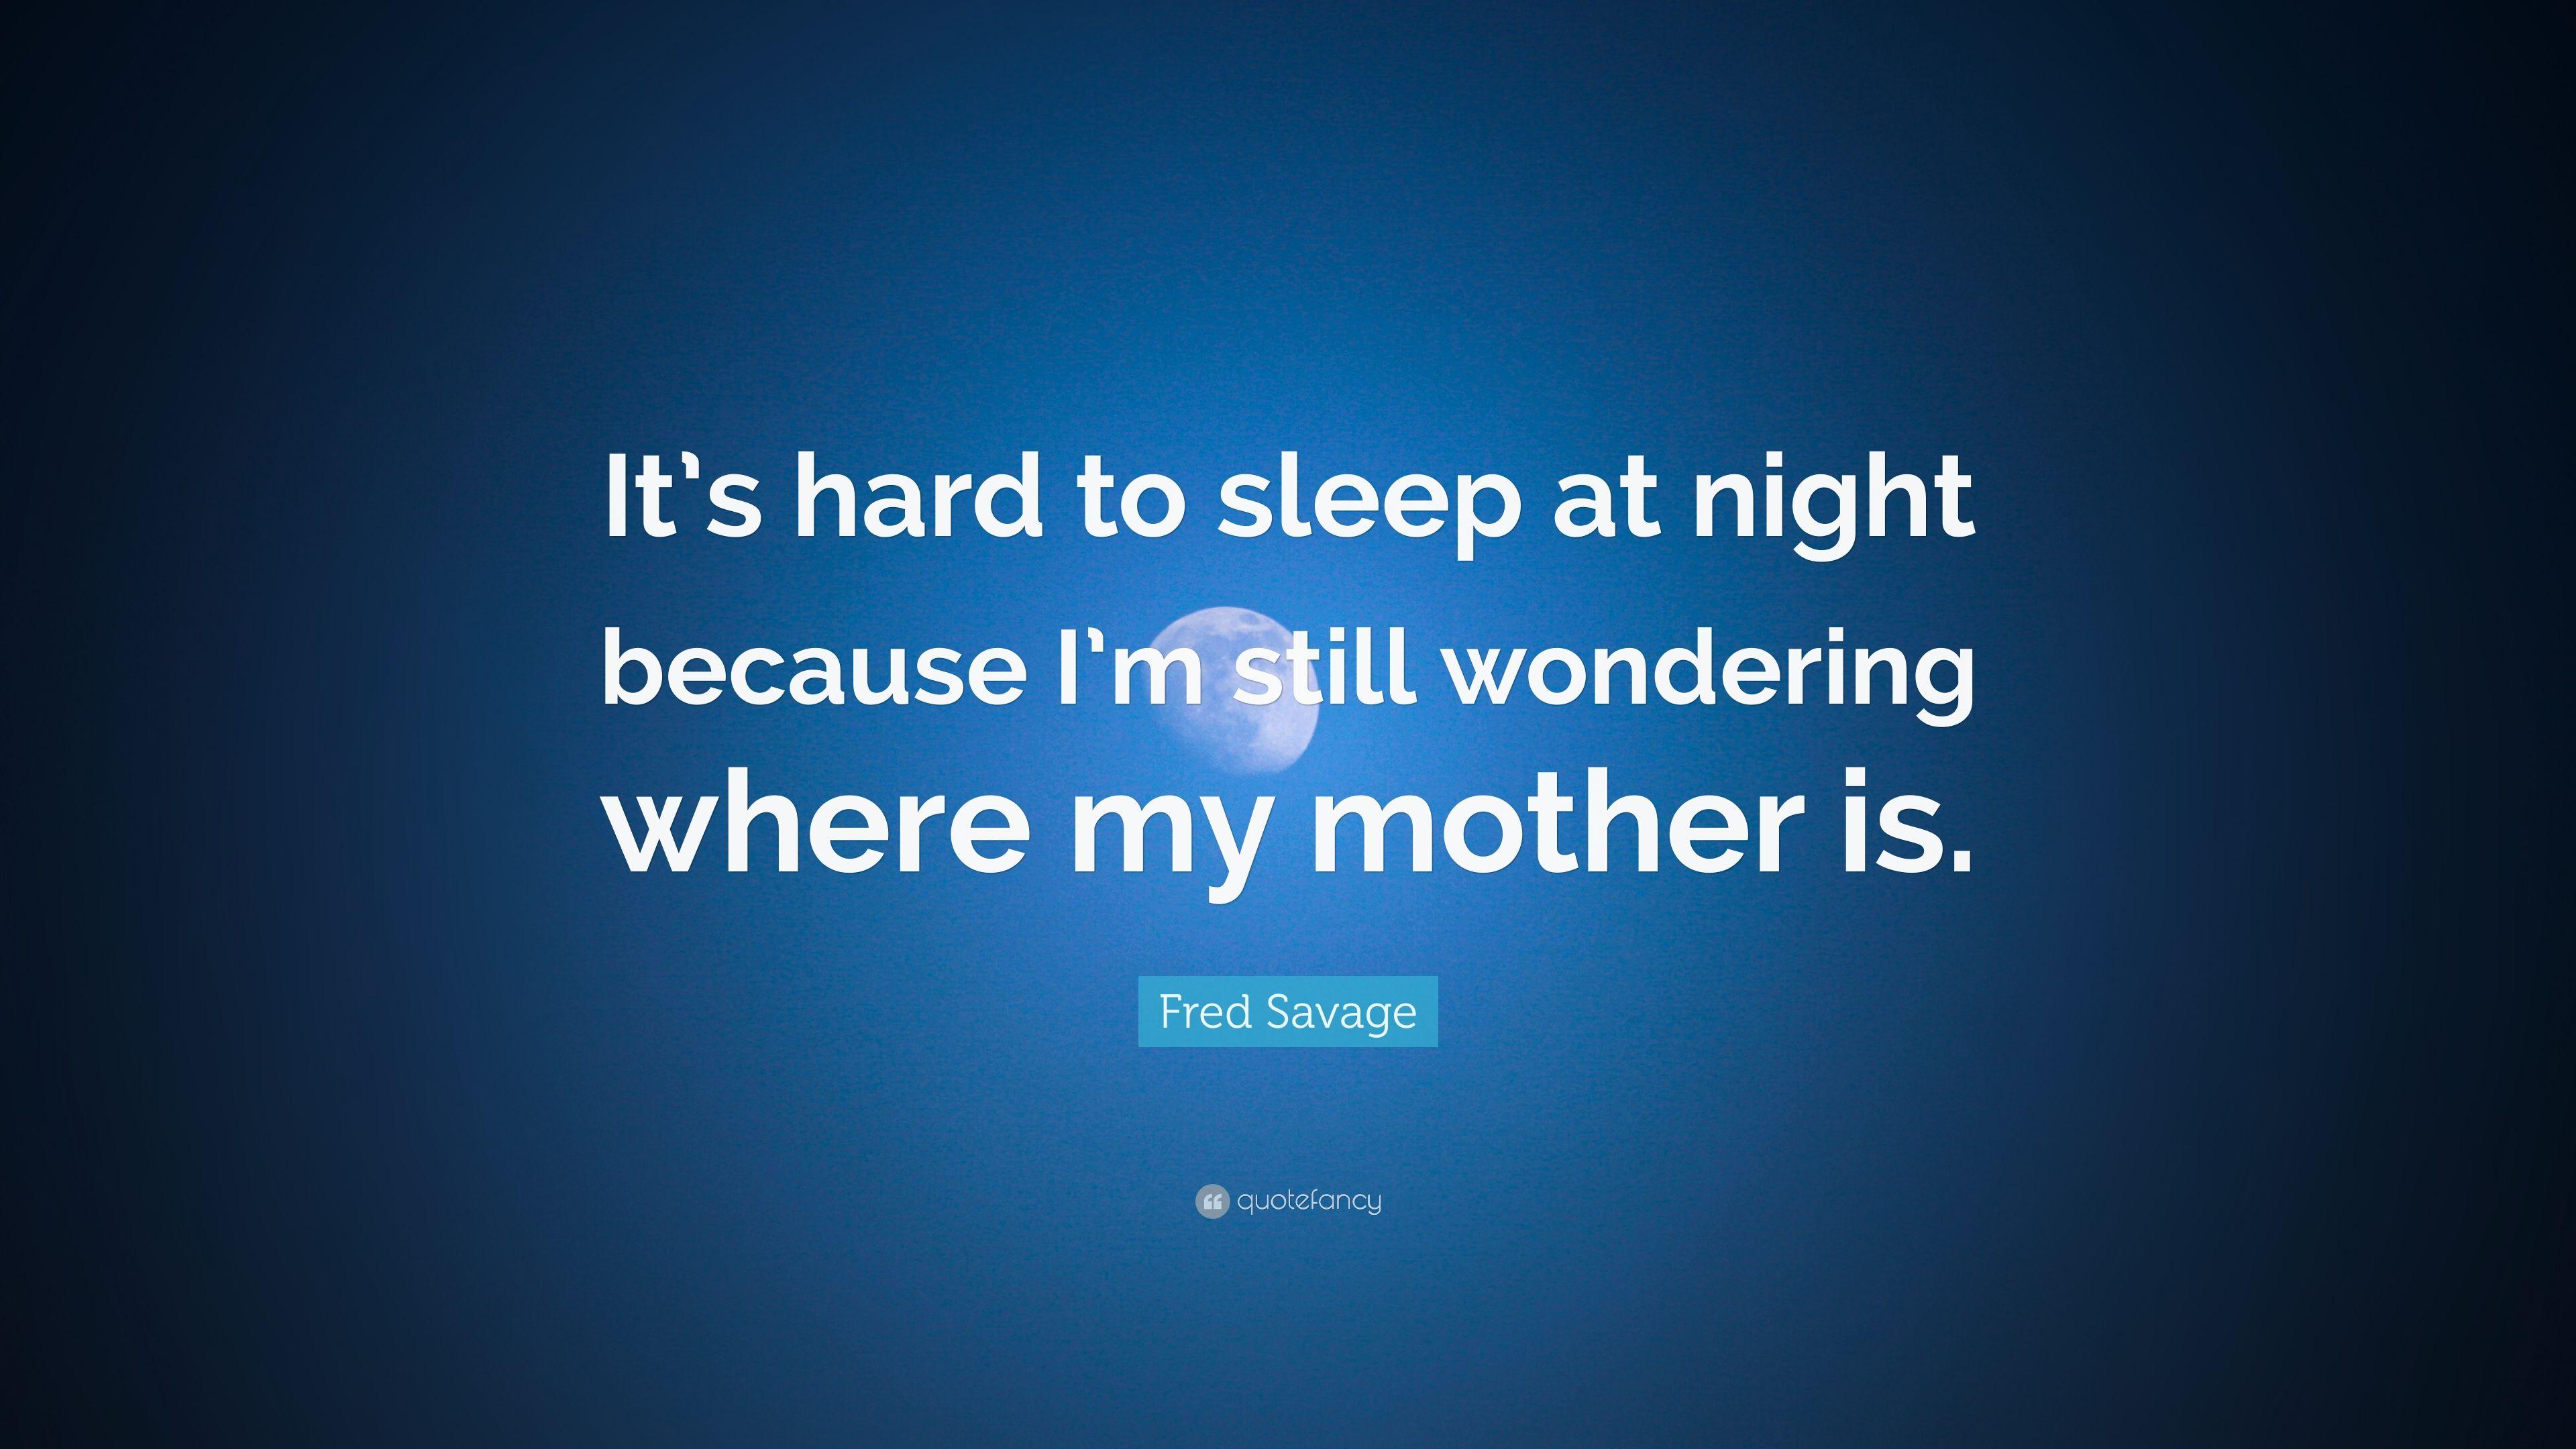 Fred Savage Quote: “It's hard to sleep at night because I'm still